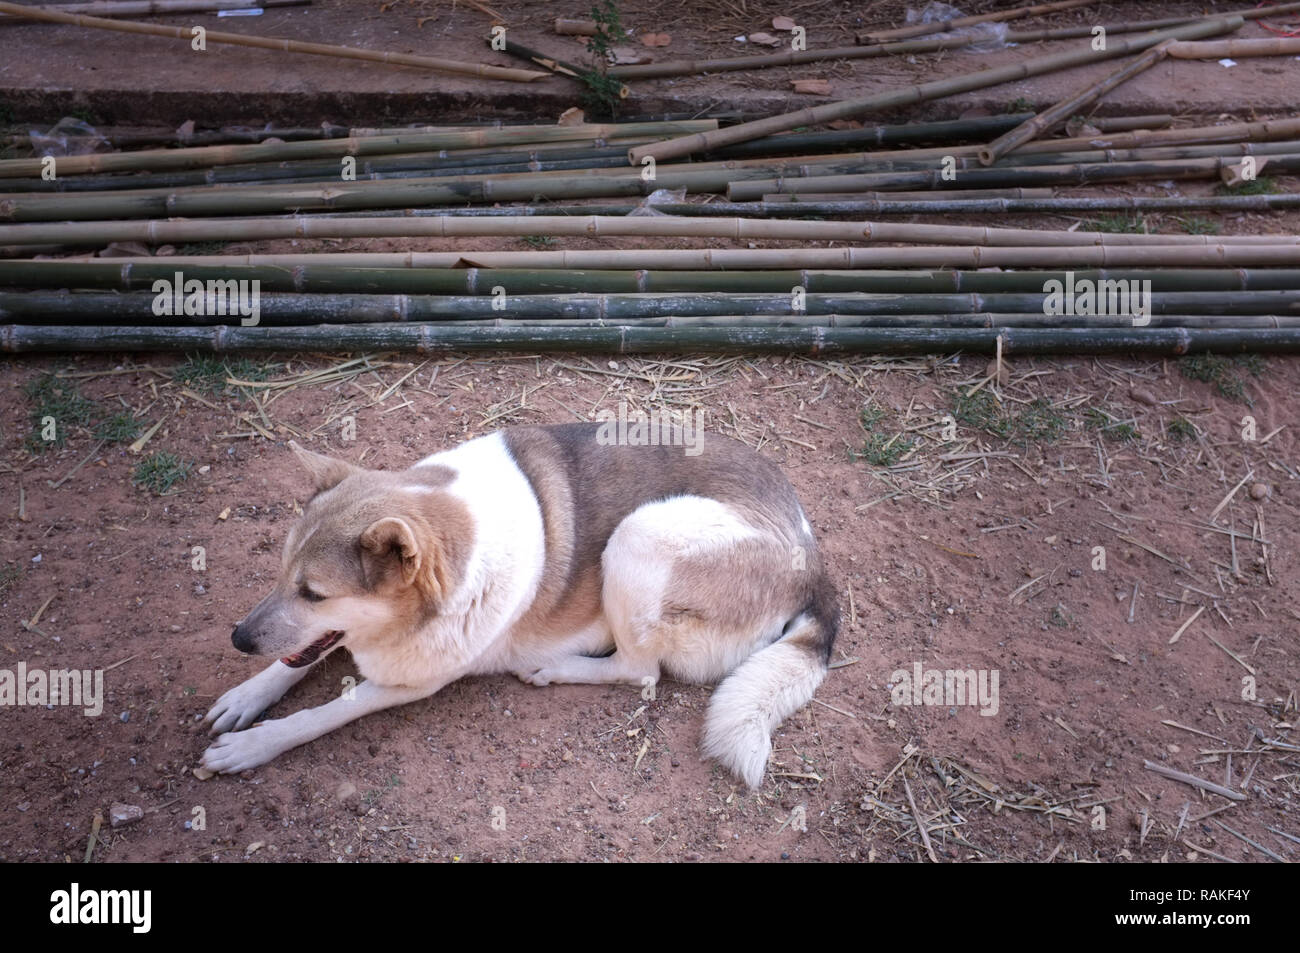 dog alone and sleeping on small stone. alone concept Stock Photo